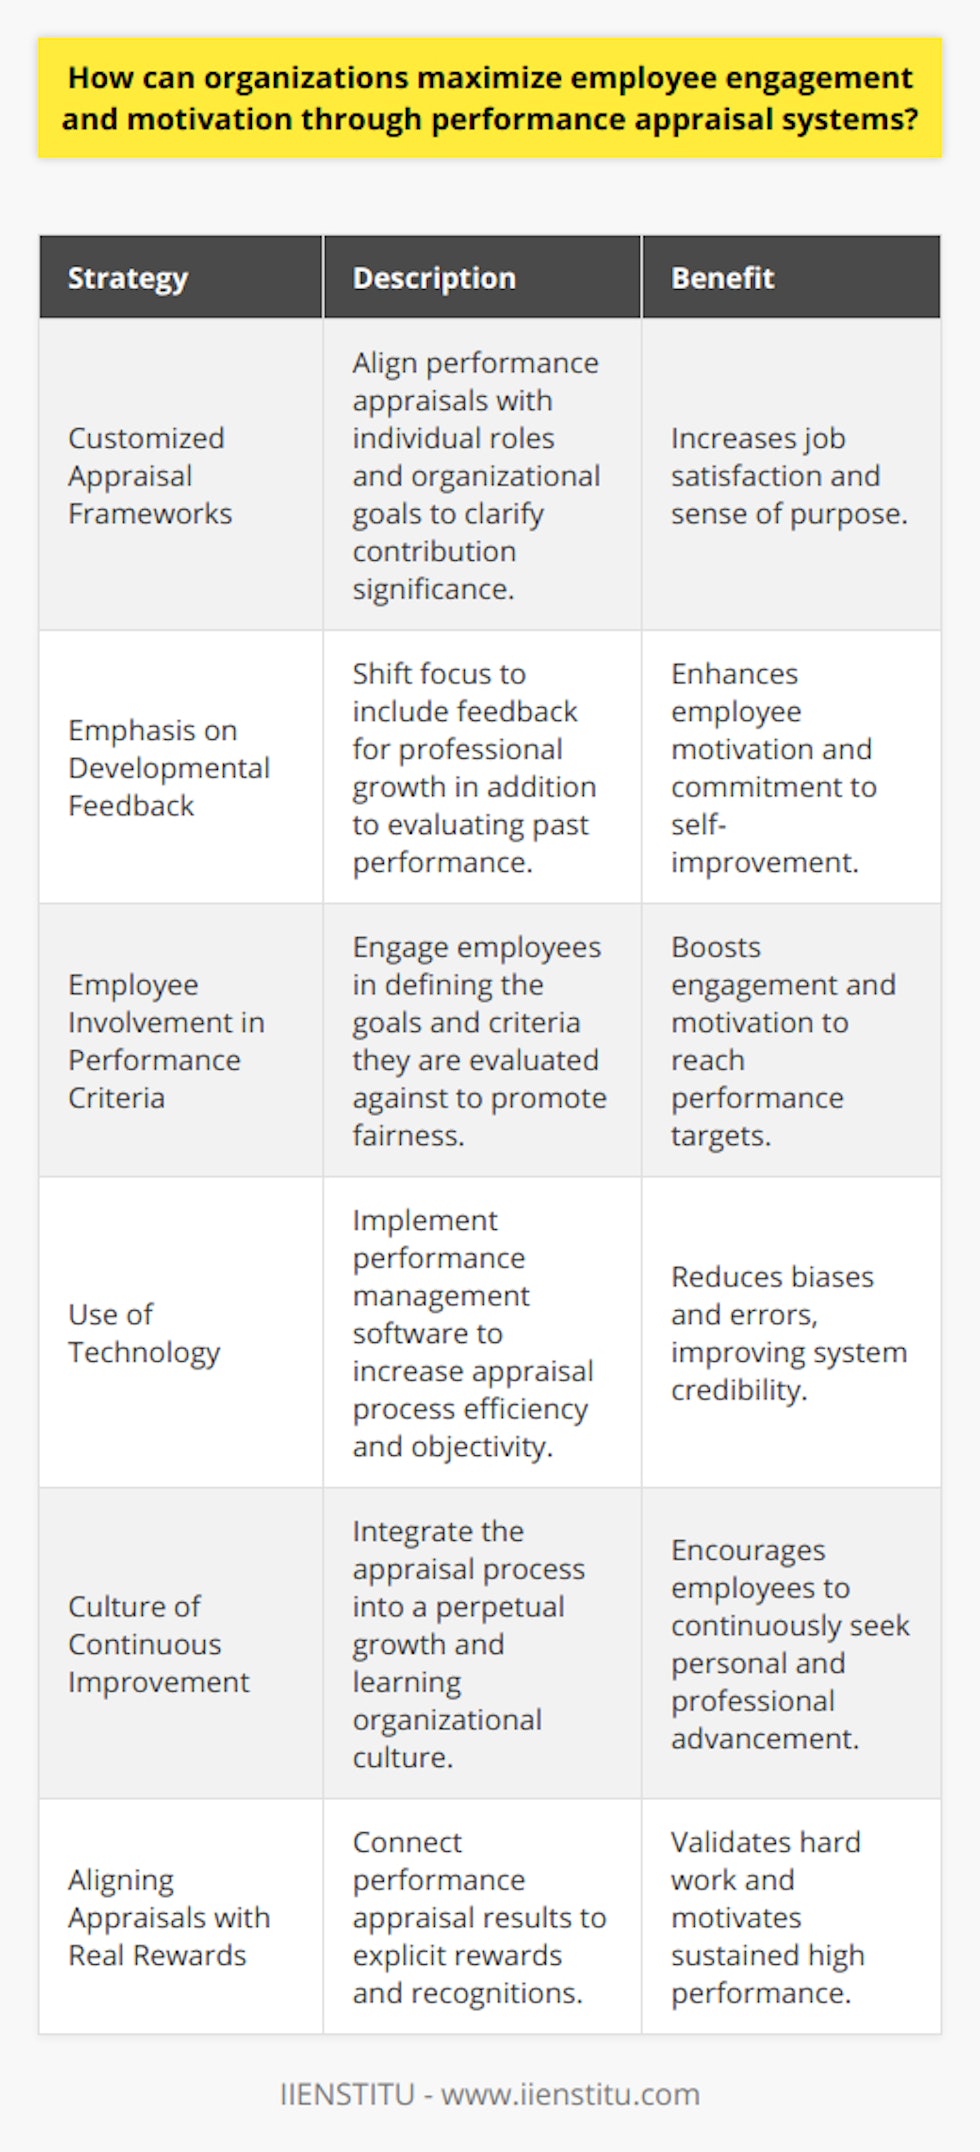 Enhancing employee engagement and motivation is a critical objective for many organizations, and performance appraisal systems play a crucial role in achieving this goal. A well-structured performance appraisal system can act as a catalyst for employee development, satisfaction, and overall organizational growth. Below are key strategies for maximizing employee engagement and motivation through such systems:1. Customized Appraisal Frameworks:Custom tailoring performance appraisals to align with individual roles and the distinct strategic goals of the organization can significantly boost employee engagement. By doing so, employees can clearly see how their efforts contribute to the larger picture, increasing their sense of purpose and job satisfaction.2. Emphasis on Developmental Feedback:Performance appraisals should not solely focus on past performance but also provide constructive feedback aimed at professional development. When employees perceive appraisals as opportunities for growth rather than just an evaluation, it can greatly enhance their motivation and commitment to self-improvement.3. Employee Involvement in Performance Criteria Definition:Involving employees in setting the performance criteria or goals they are to be evaluated against can lead to a greater sense of fairness and control, which can, in turn, foster higher levels of engagement. This participative approach ensures that employees are on board with expectations and more motivated to meet them.4. Use of Technology to Enhance Efficiency and Accuracy:Incorporating technology, like advanced performance management software offered by providers such as IIENSTITU, can streamline the appraisal process, making it more efficient and unbiased. Such tools can help eliminate common errors and biases associated with traditional appraisal methods, improving the overall credibility of the system.5. Establishing a Culture of Continuous Improvement:Performance appraisal should be part of a broader culture of continuous improvement within the organization. By promoting a growth mindset and continuous learning, organizations can keep their employees motivated and engaged, always seeking to excel and move forward.6. Aligning Appraisal Outcomes with Real Rewards:Employees need to see a clear link between their performance appraisals and tangible outcomes. This could be in the form of promotions, bonuses, professional development opportunities, or other rewards that validate their hard work and encourage ongoing high performance.In implementing these strategies, organizations must pay careful attention to the nuances of their operational context and the unique needs of their workforce. Performance appraisal systems that are genuinely attuned to the drivers of motivation and engagement within the organizational culture are likely to yield the most beneficial outcomes.